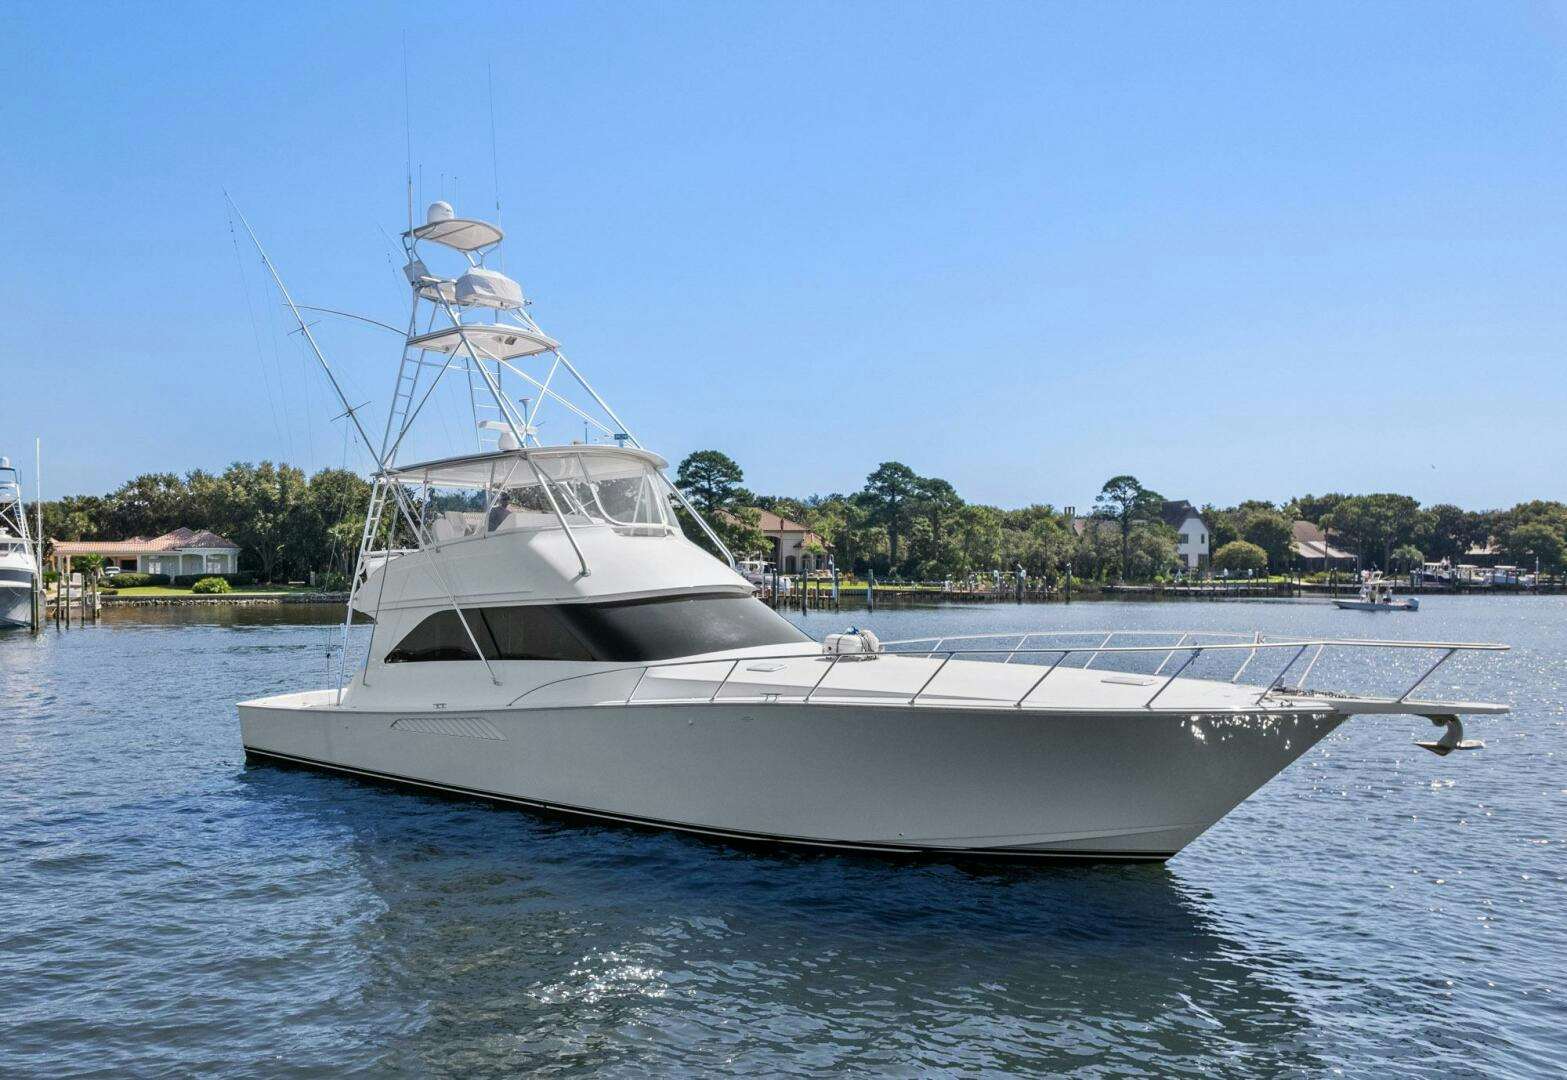 Once moore
Yacht for Sale